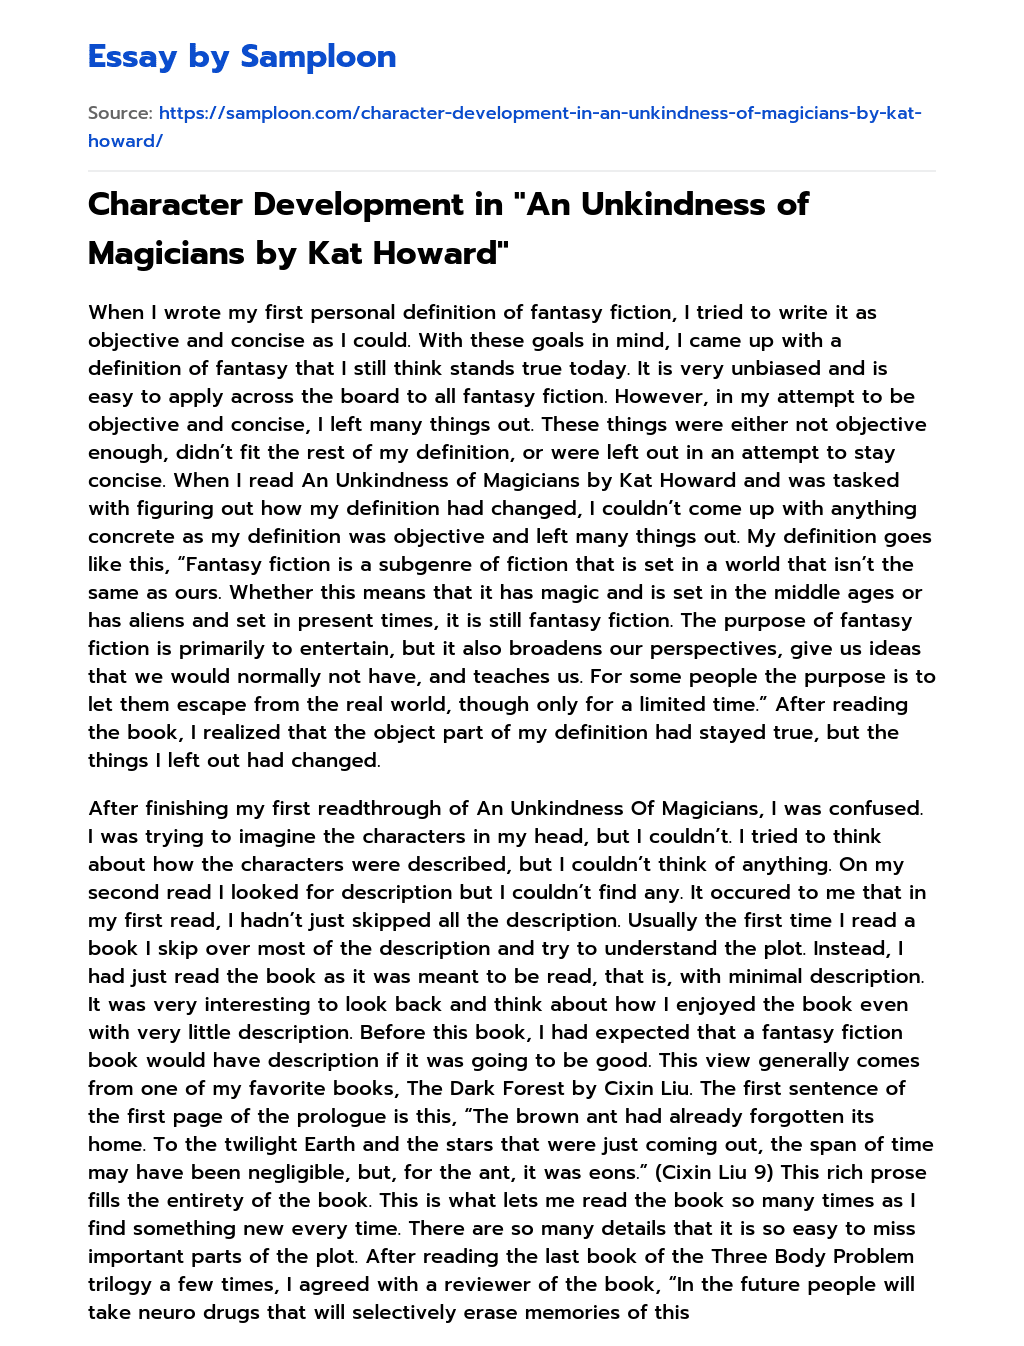 Character Development in “An Unkindness of Magicians by Kat Howard” essay